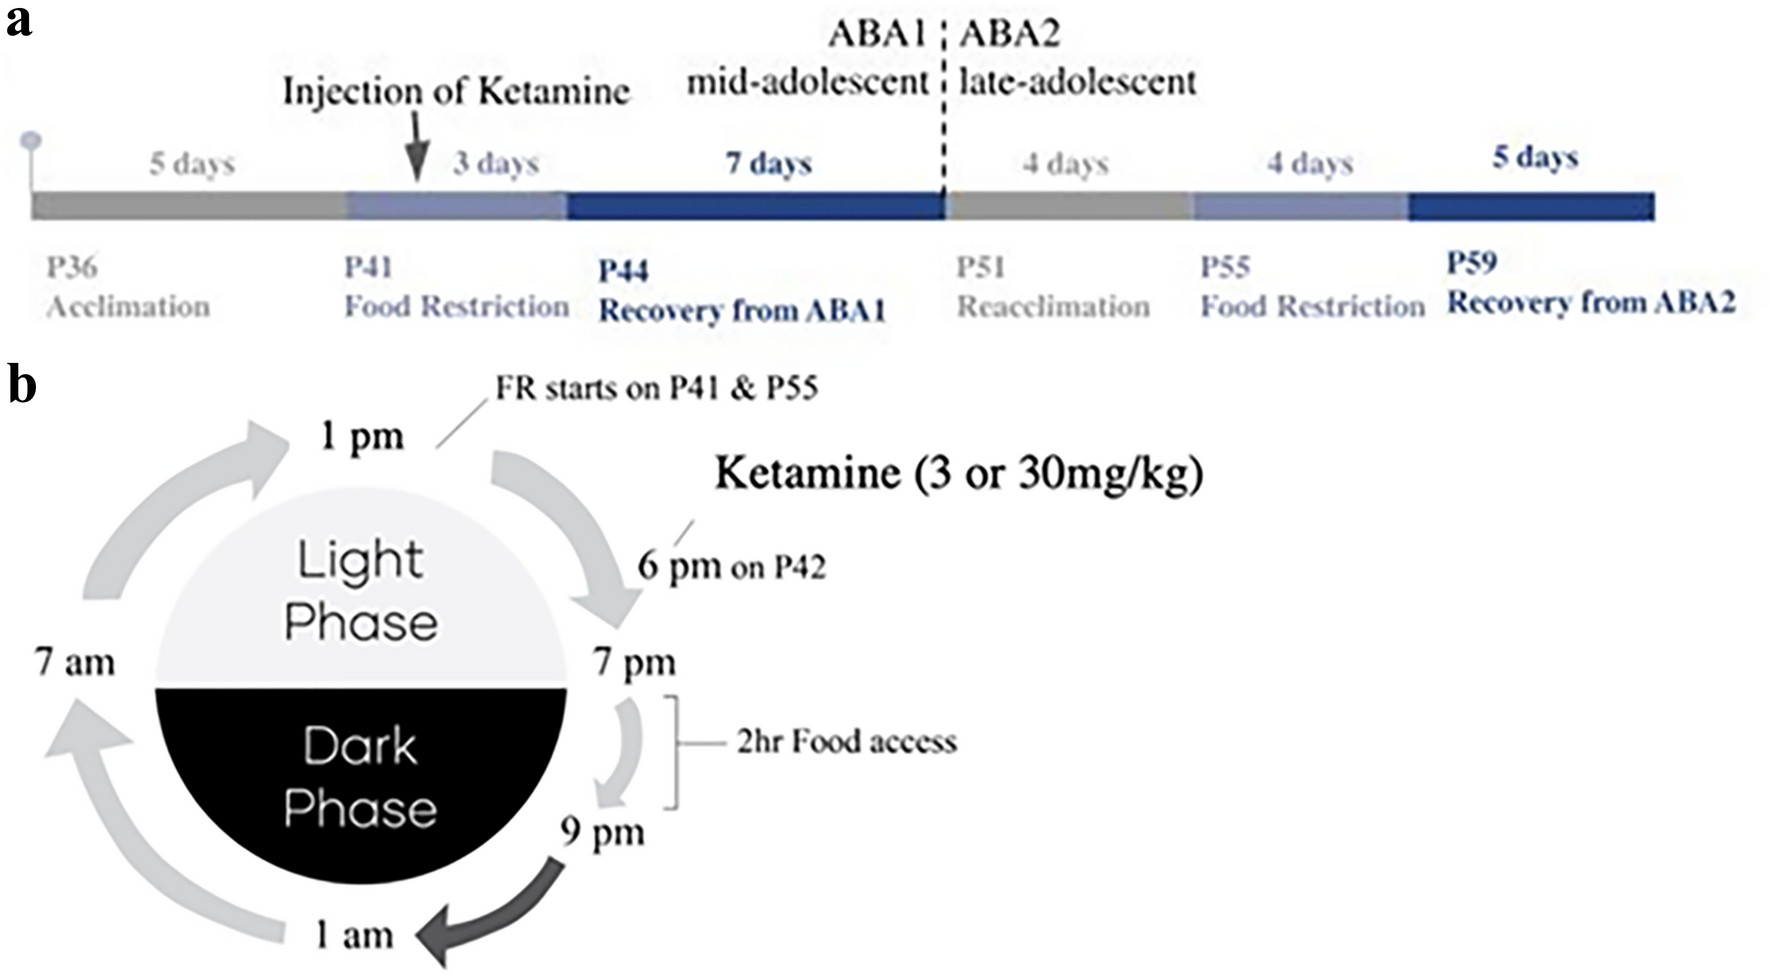 Ketamine ameliorates activity-based anorexia of adolescent female mice through changes in GluN2B-containing NMDA receptors at postsynaptic cytoplasmic locations of pyramidal neurons and interneurons of medial prefrontal cortex